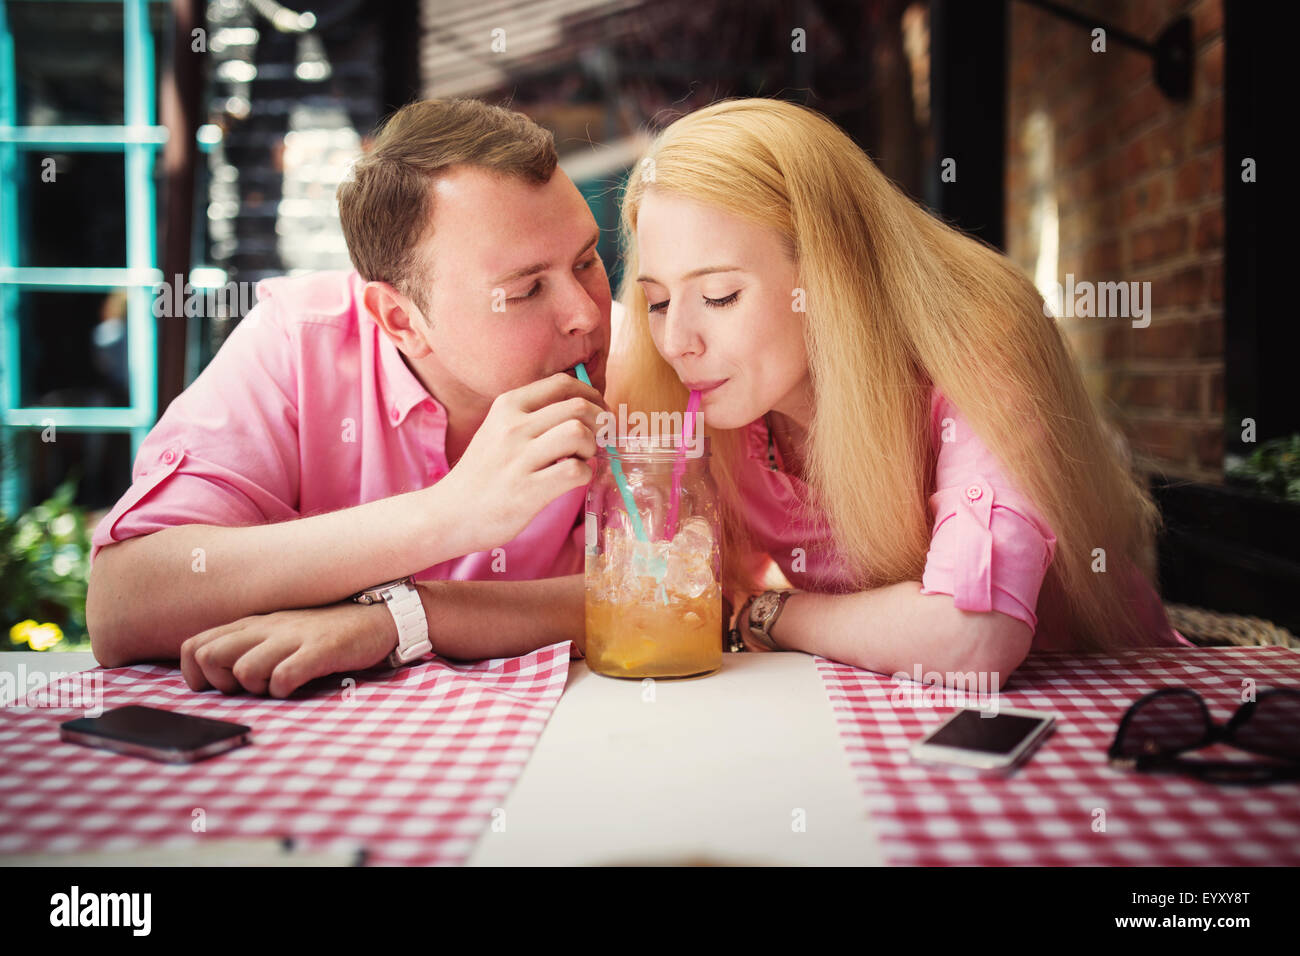 Cheerful couple surfing the web, looking a photo on smartphone, summer outdoor cafe Stock Photo